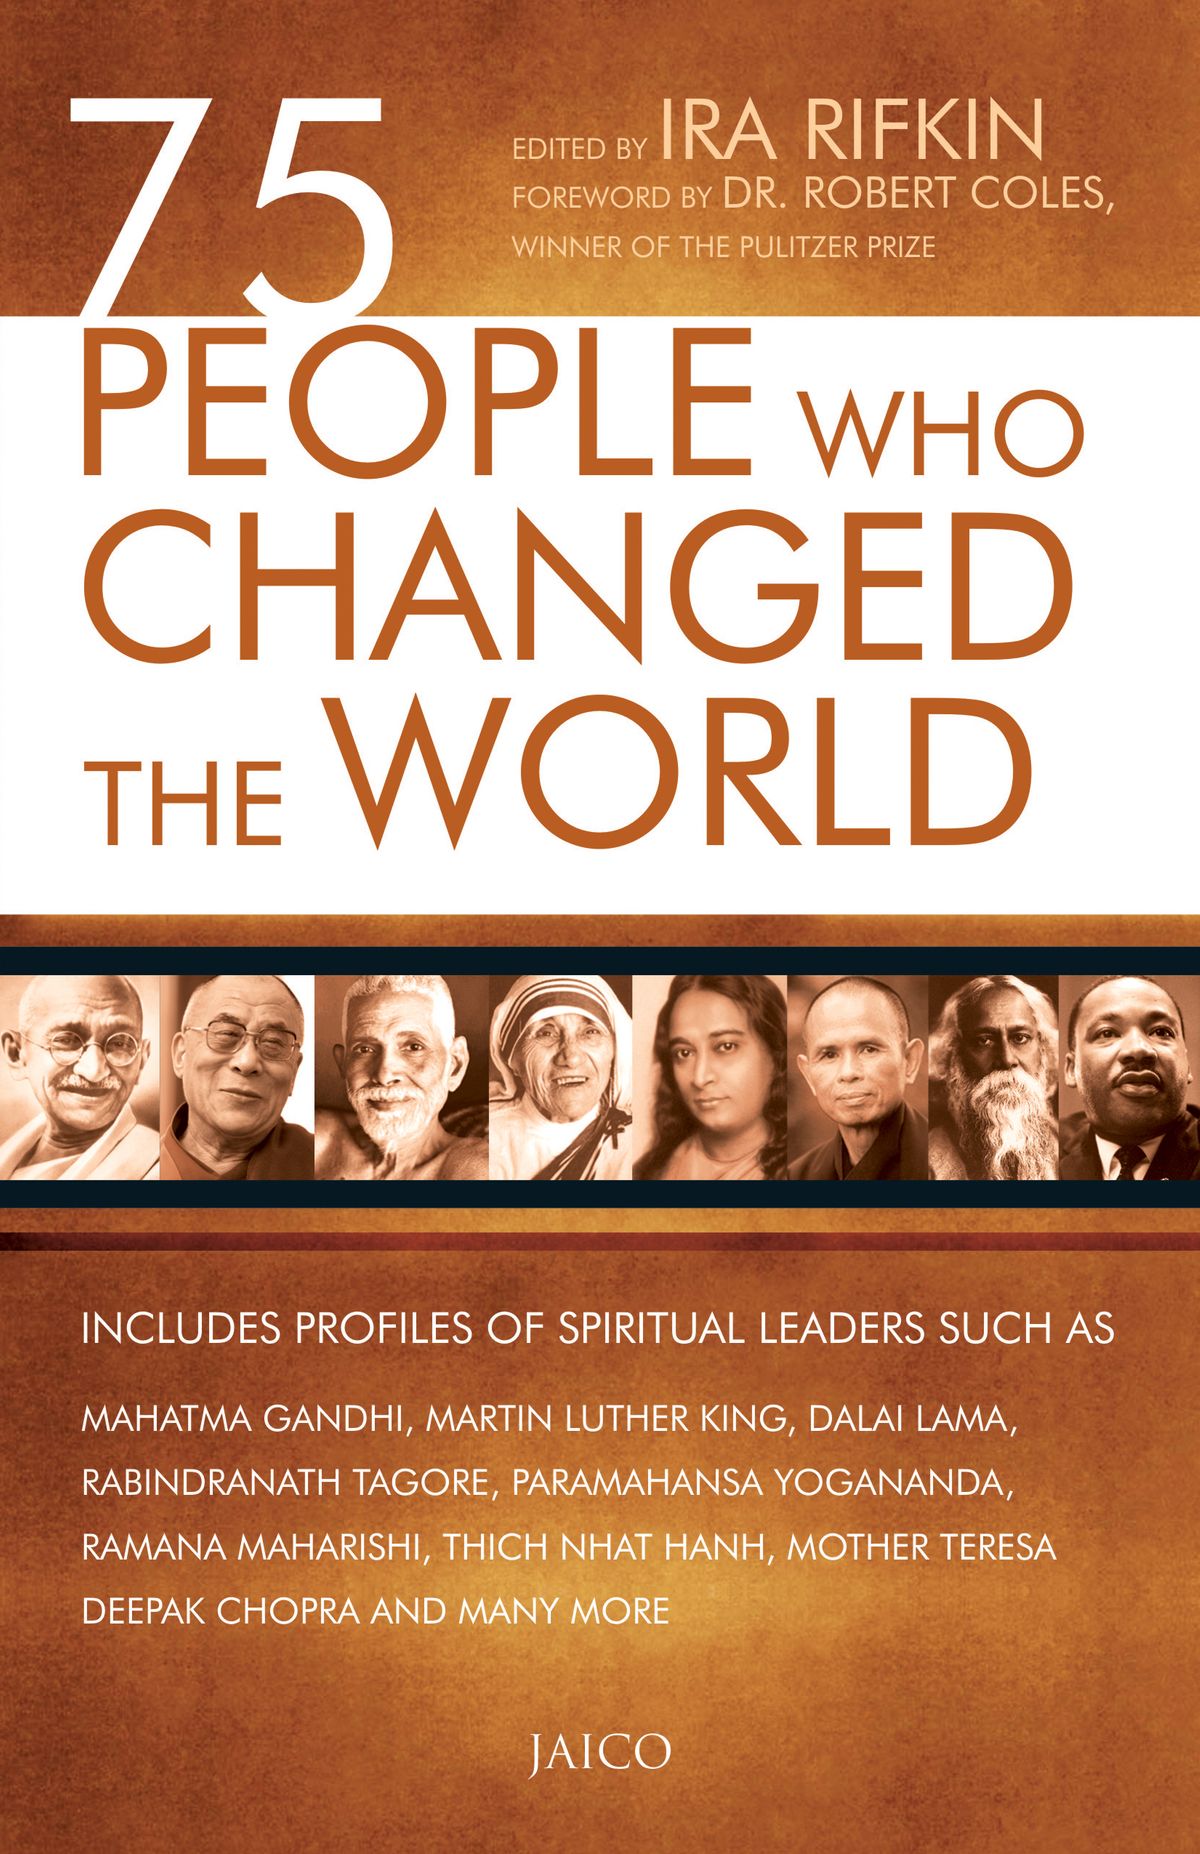 75 People Who Changed The World